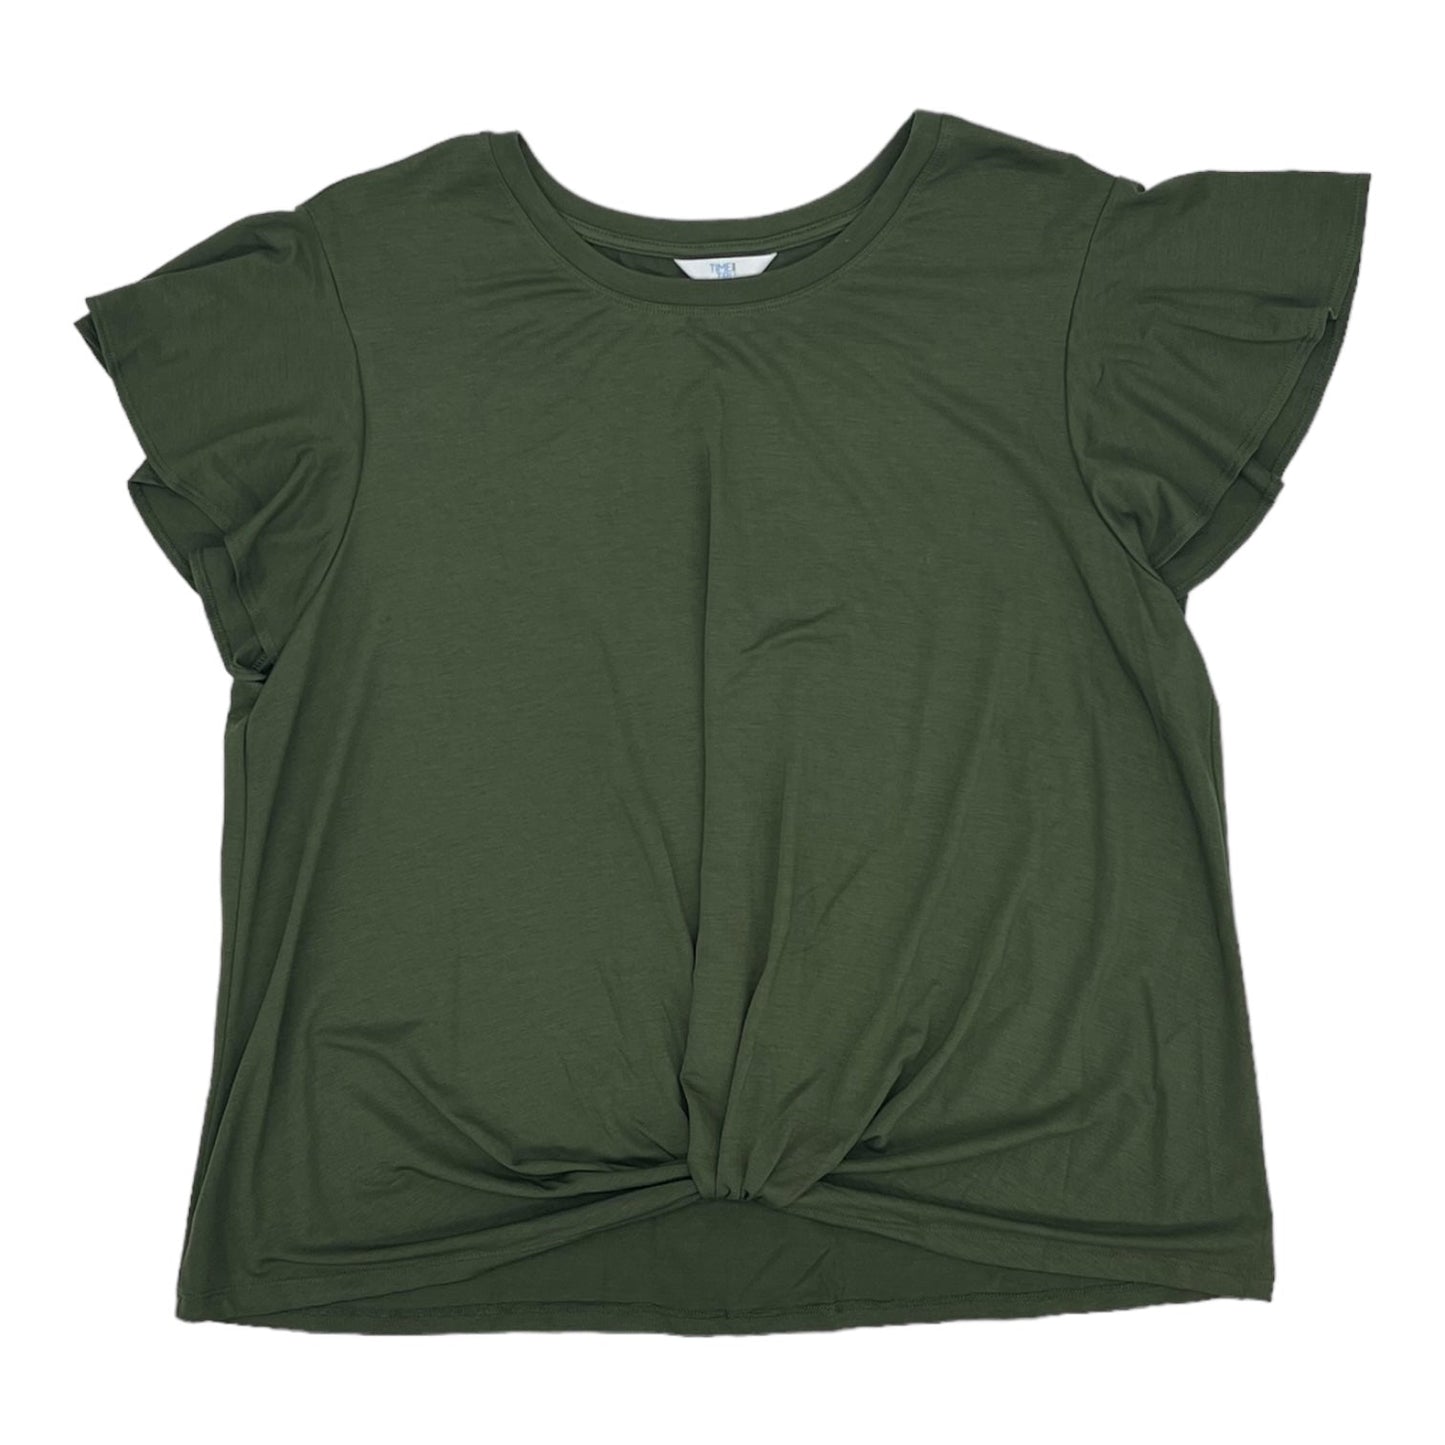 GREEN TOP SS BASIC by TIME AND TRU Size:3X